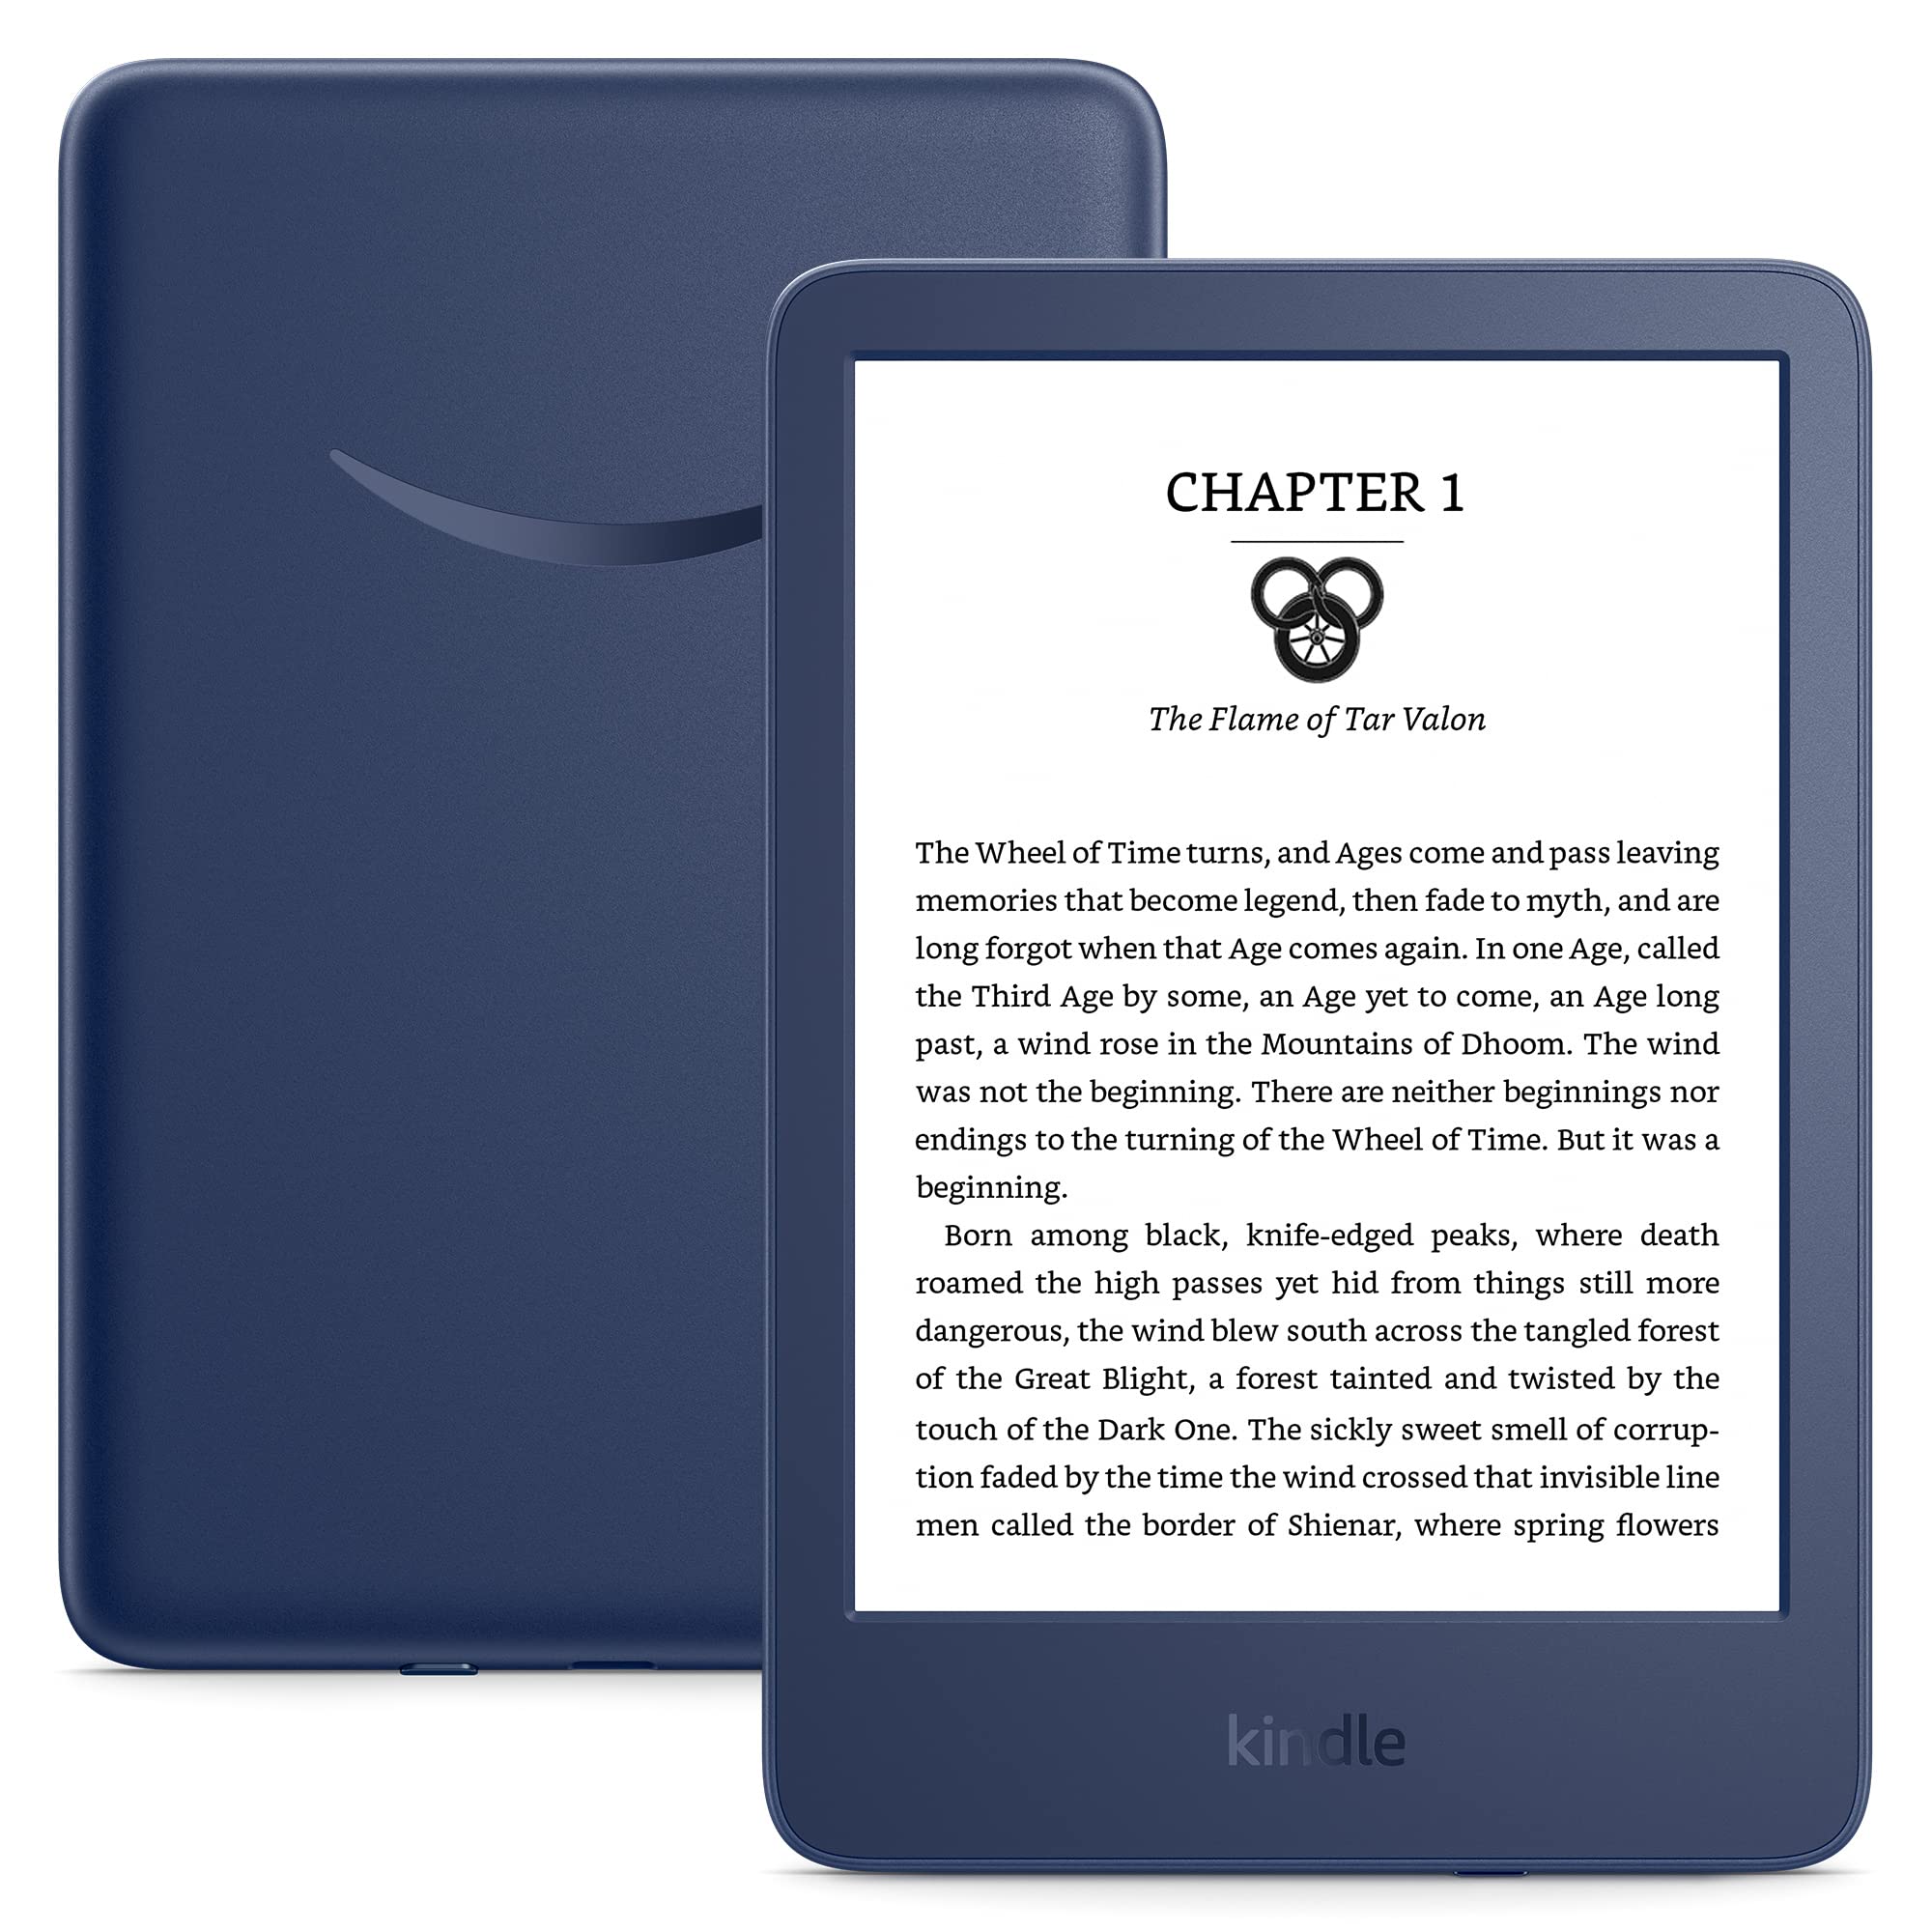 All-new Kindle (2022 release) - The lightest and most compact Kindle, now with a 6” 300 ppi high-resolution display, and 2x the storage - Denim